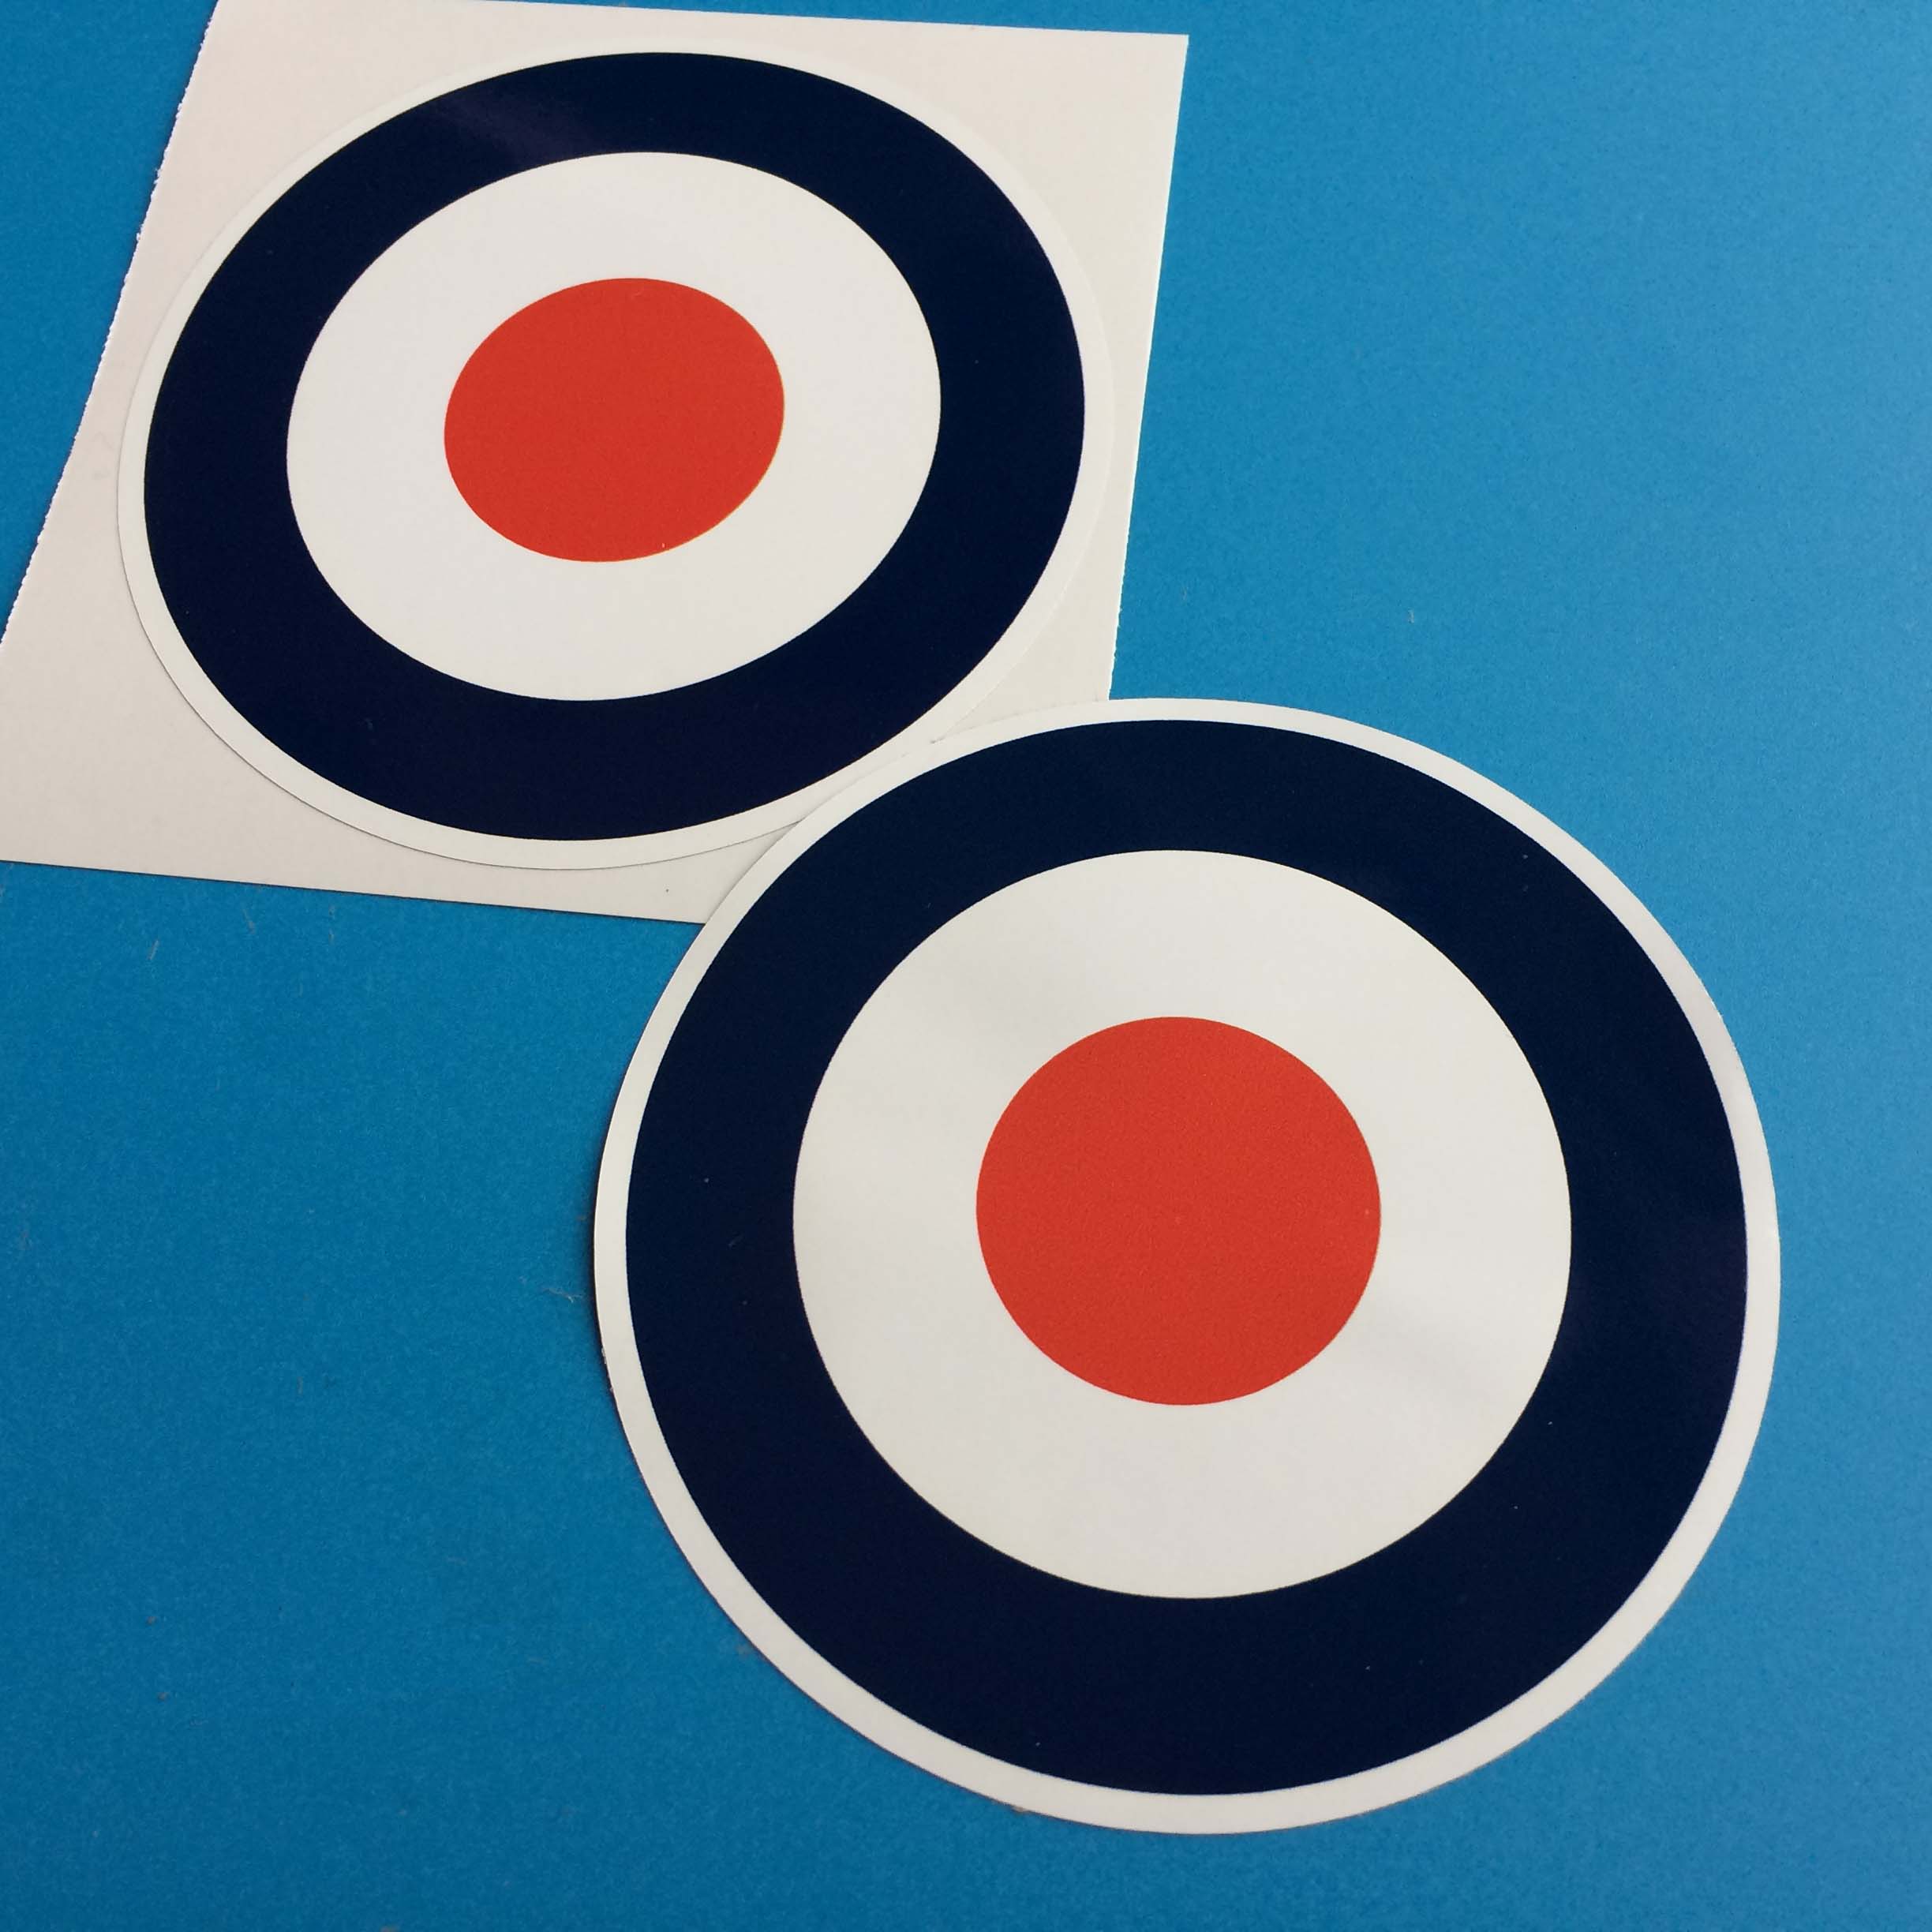 RAF ROUNDEL STICKERS. A blue and white roundel with a red centre.